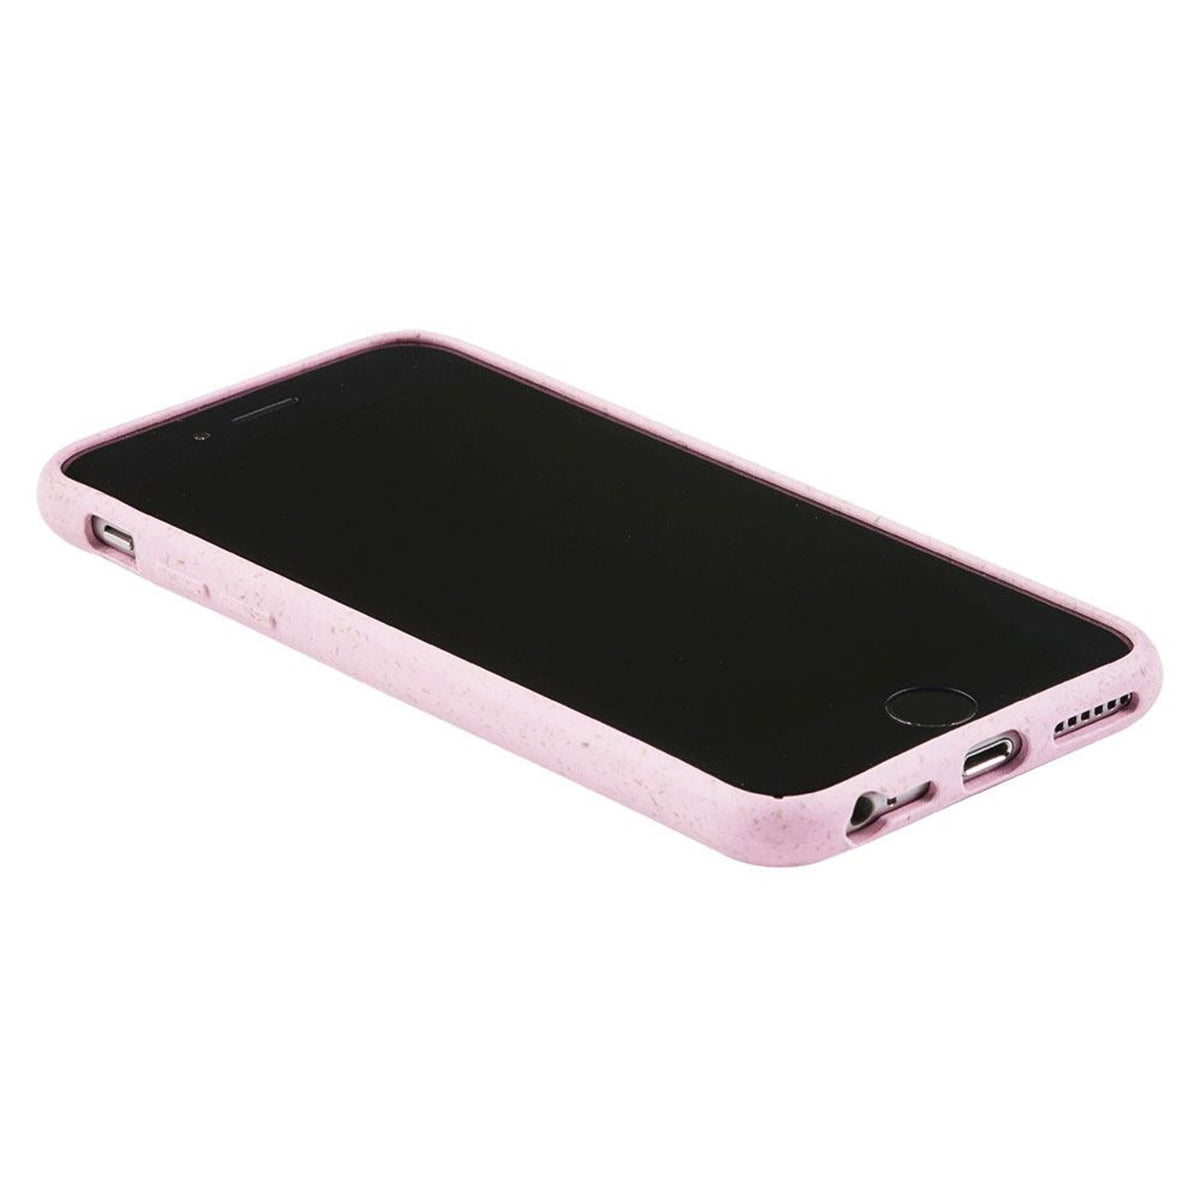 GreyLime-iPhone-6-7-8-Plus-biodegradable-cover-Pink-COIP678P05-V3.jpg